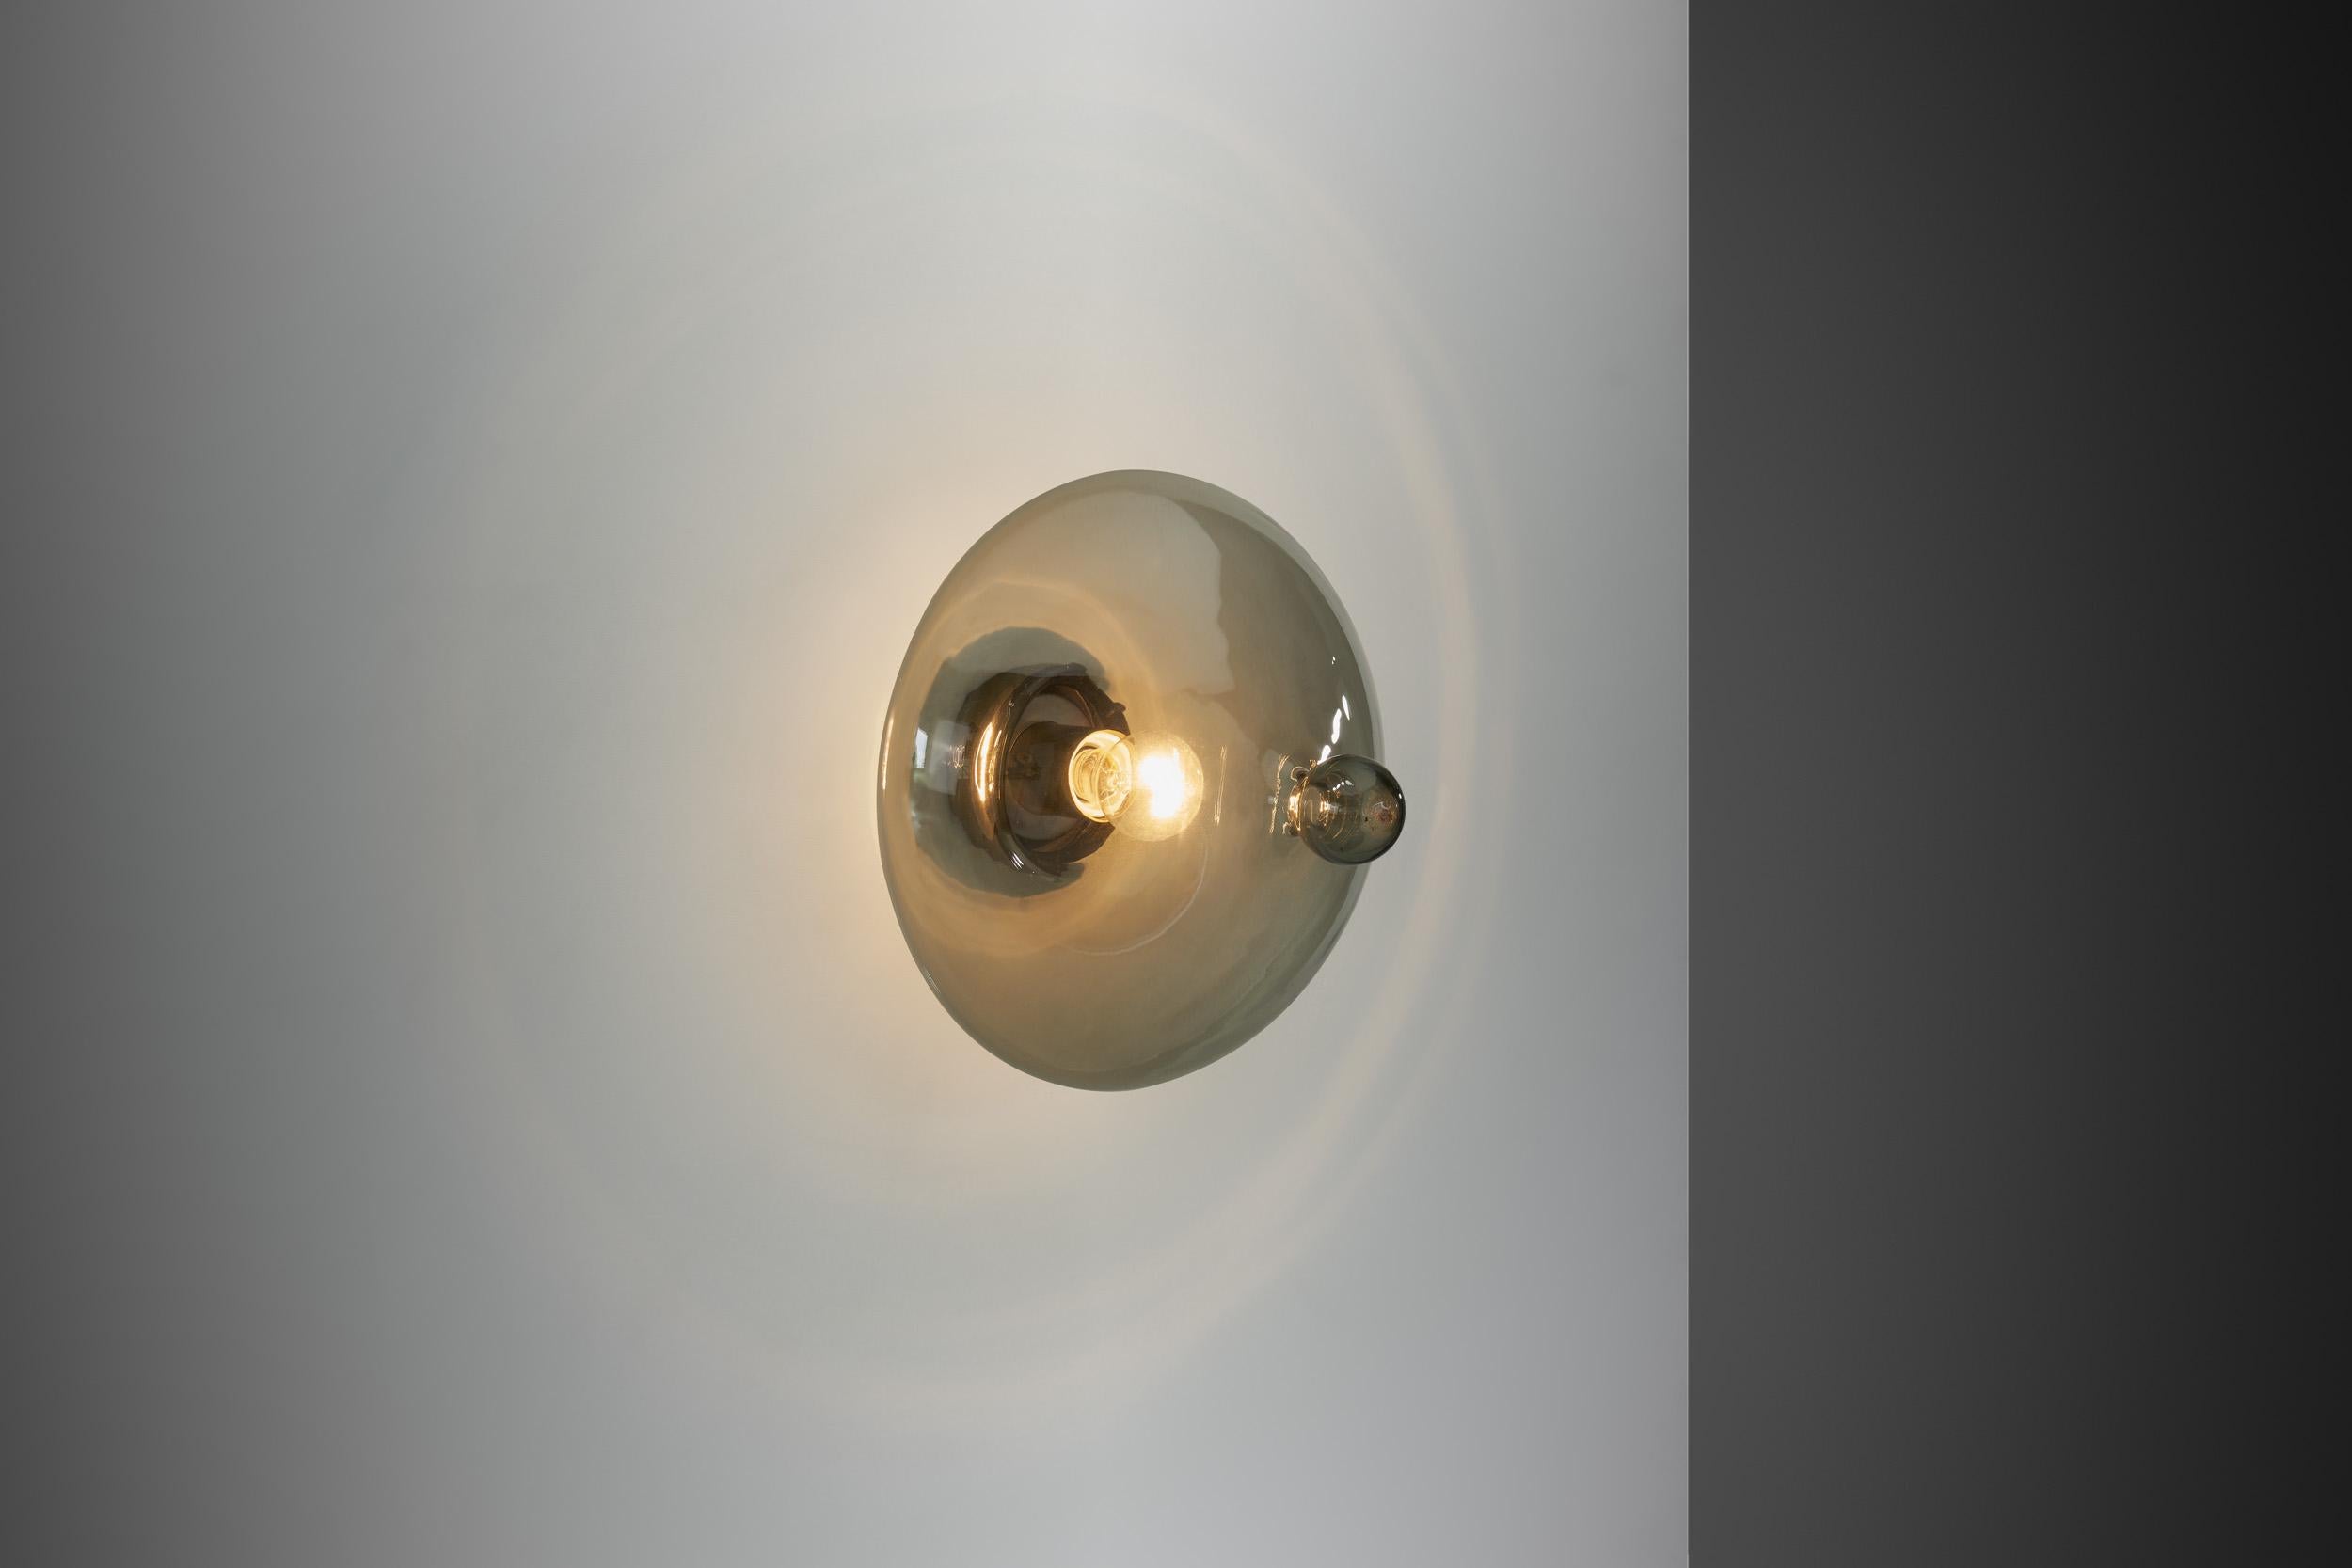 Dutch Wall Lamp “Chaparral” by Raak, The Netherlands 1960s